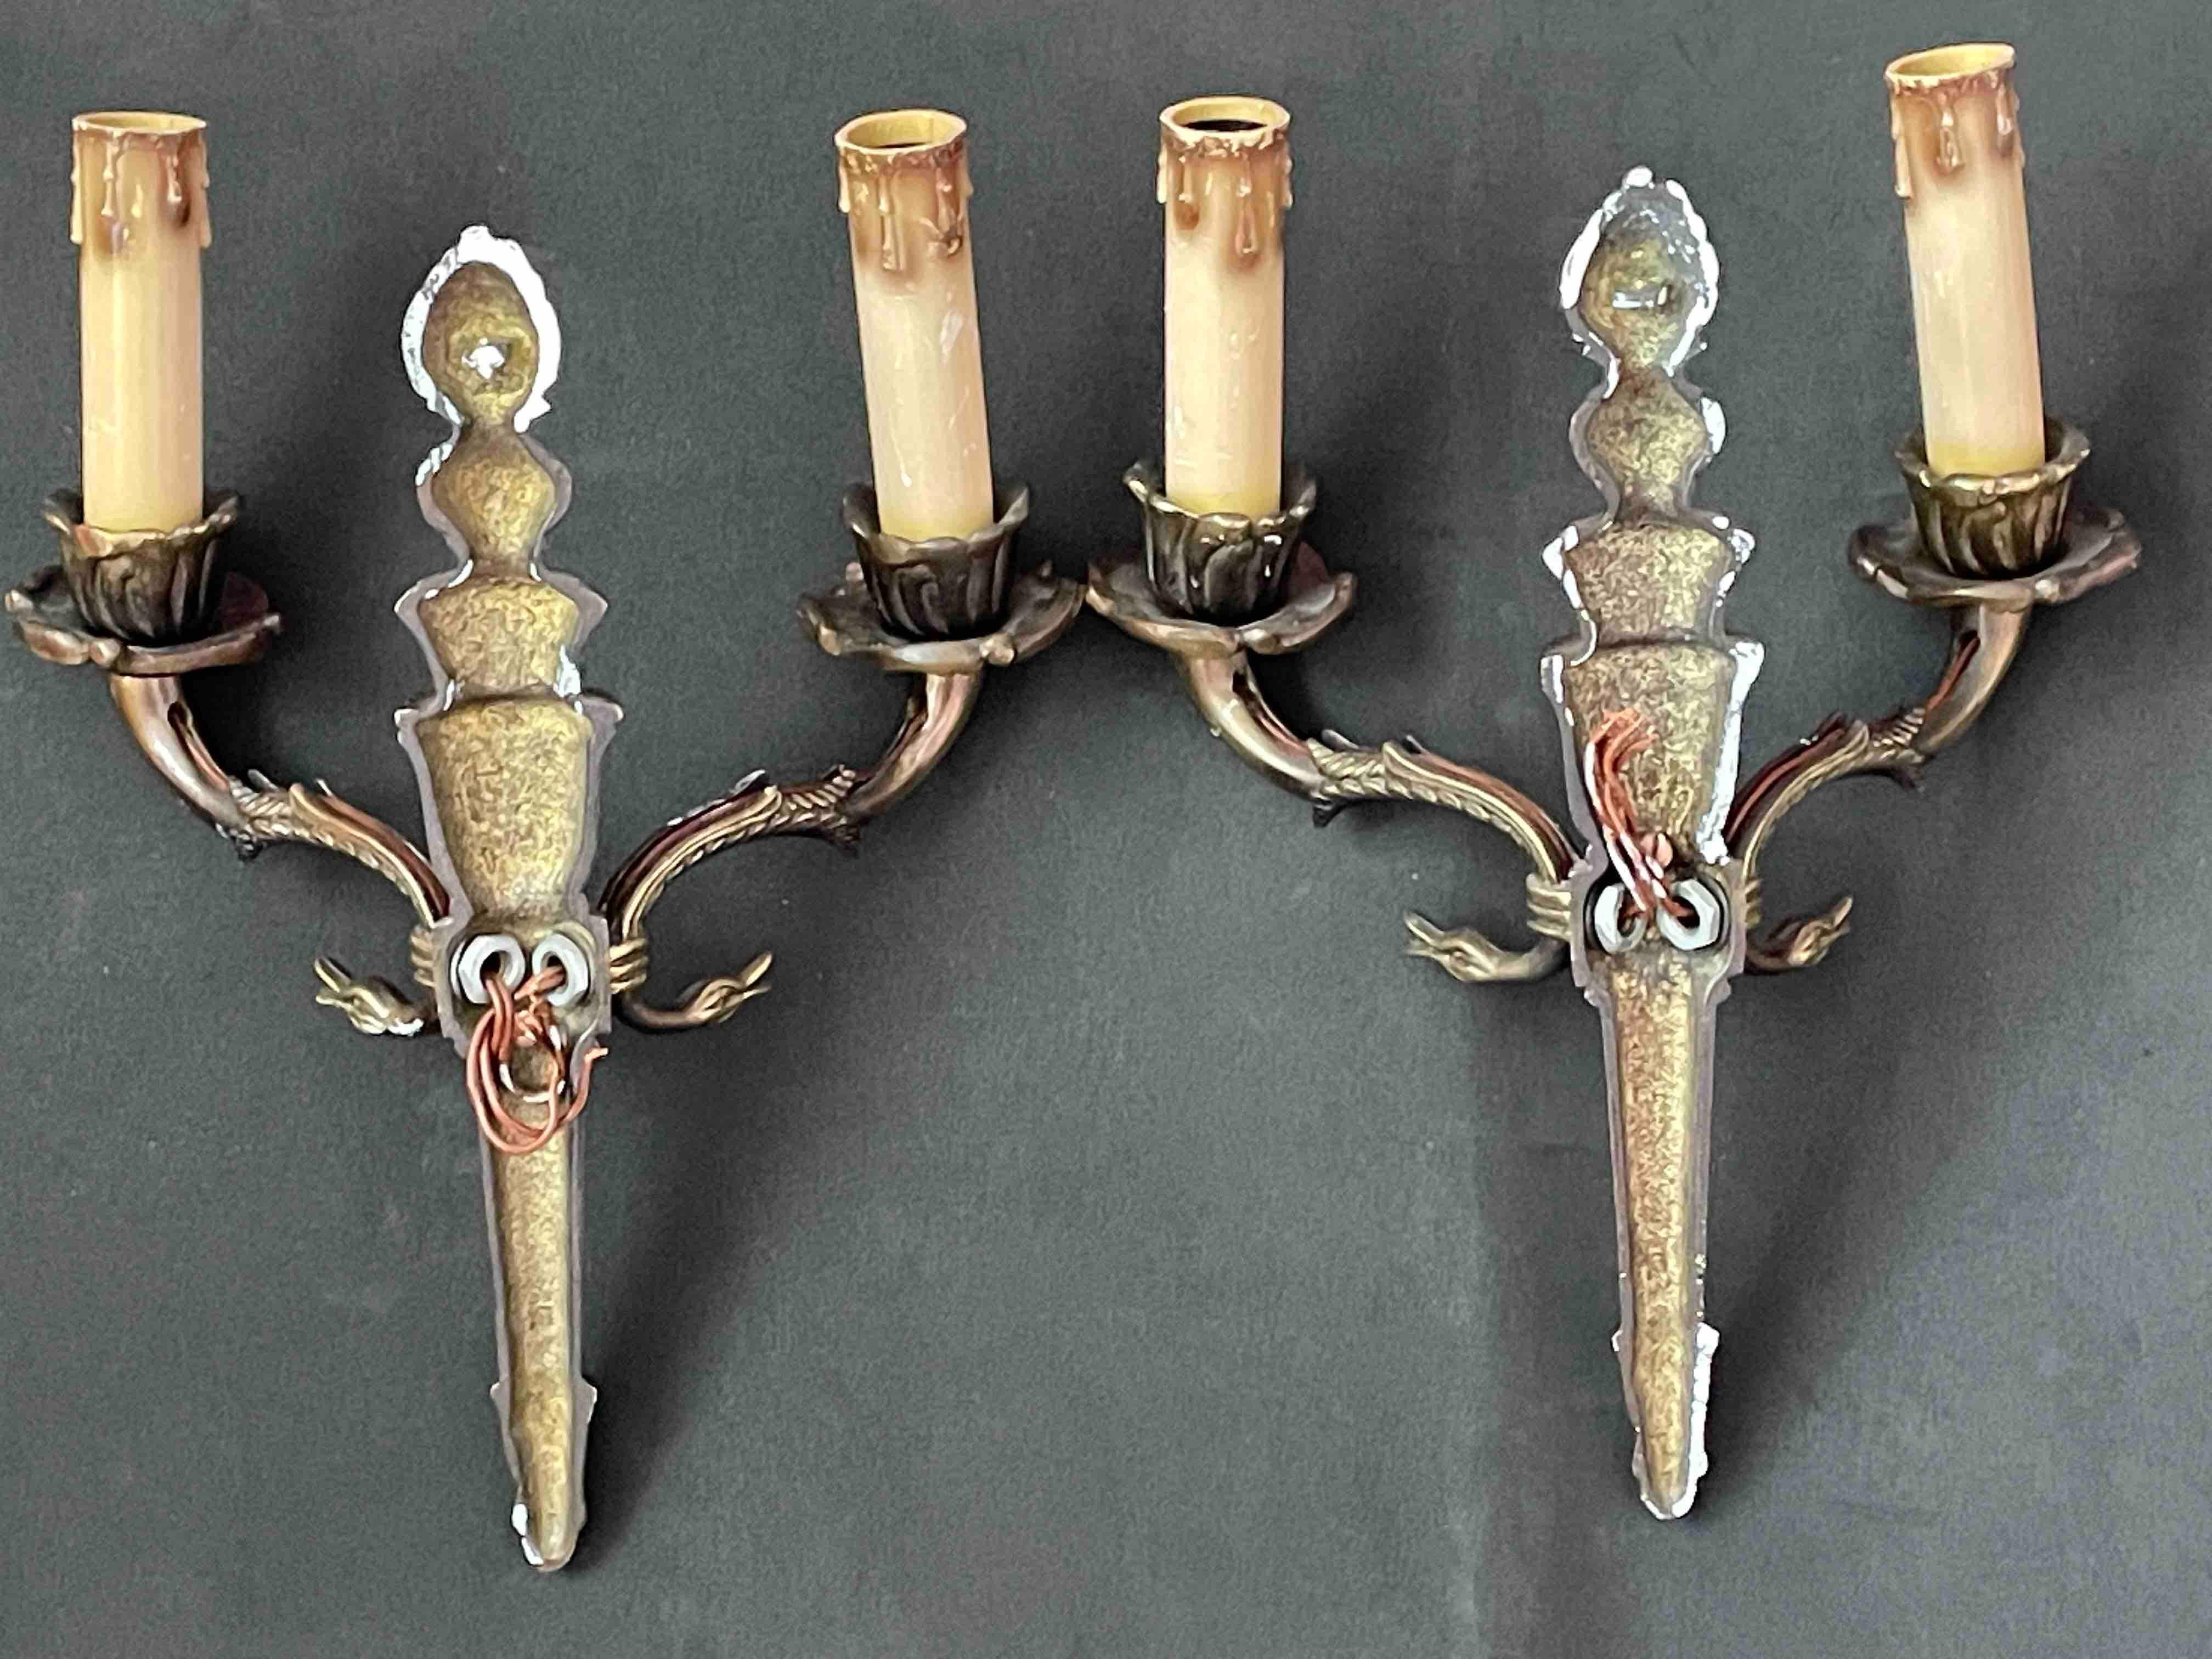 Pair of Empire Wall Sconces in Bronze with Swan Goose Motif Arms, Italy, 1950s For Sale 10